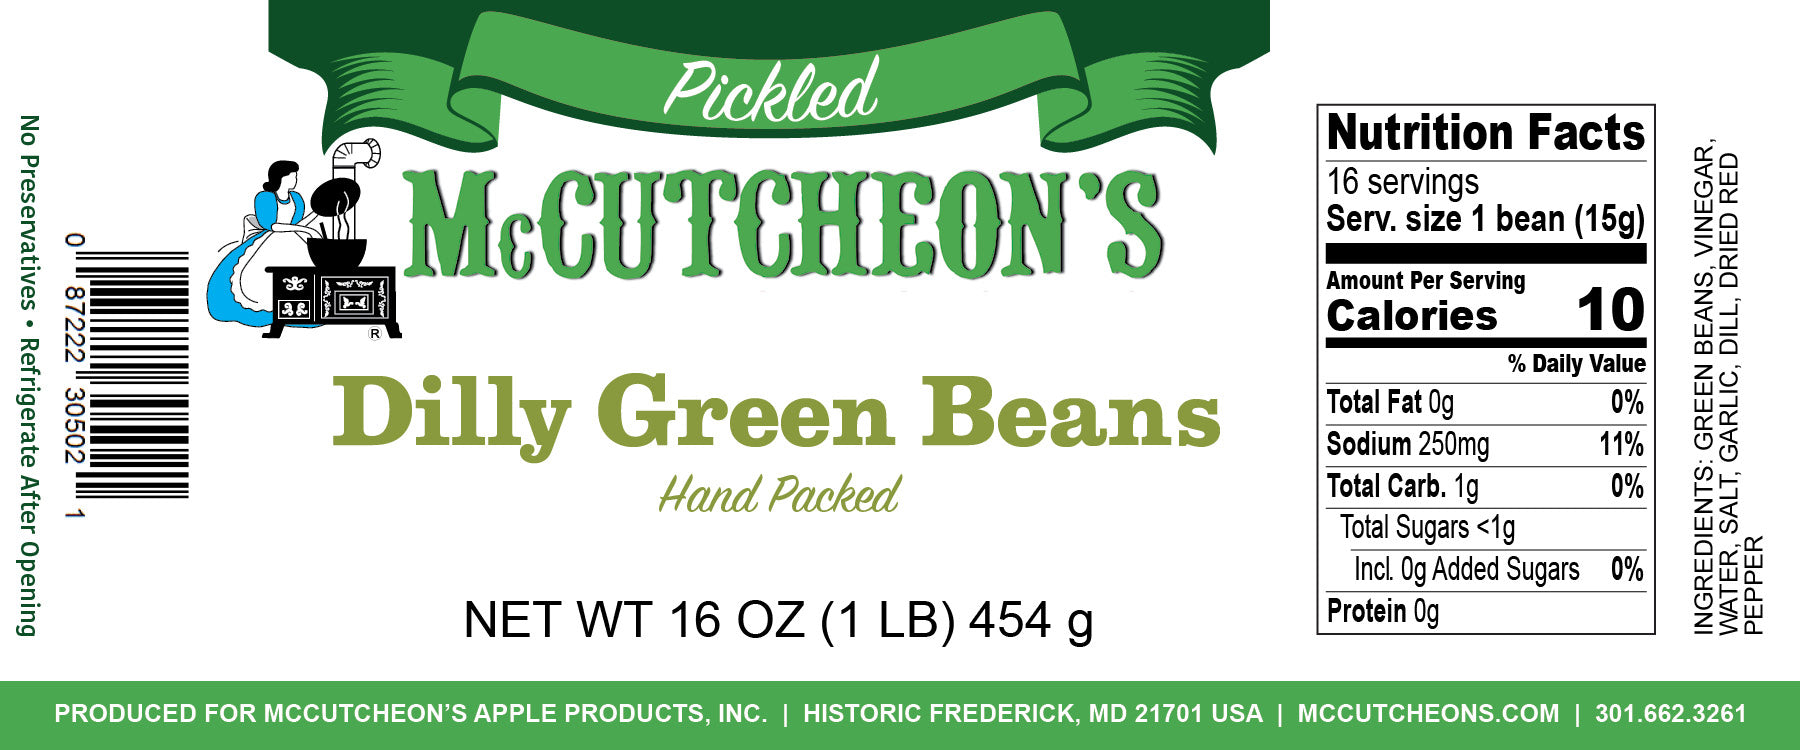 nutrition label for McCutcheon's dilly green beans